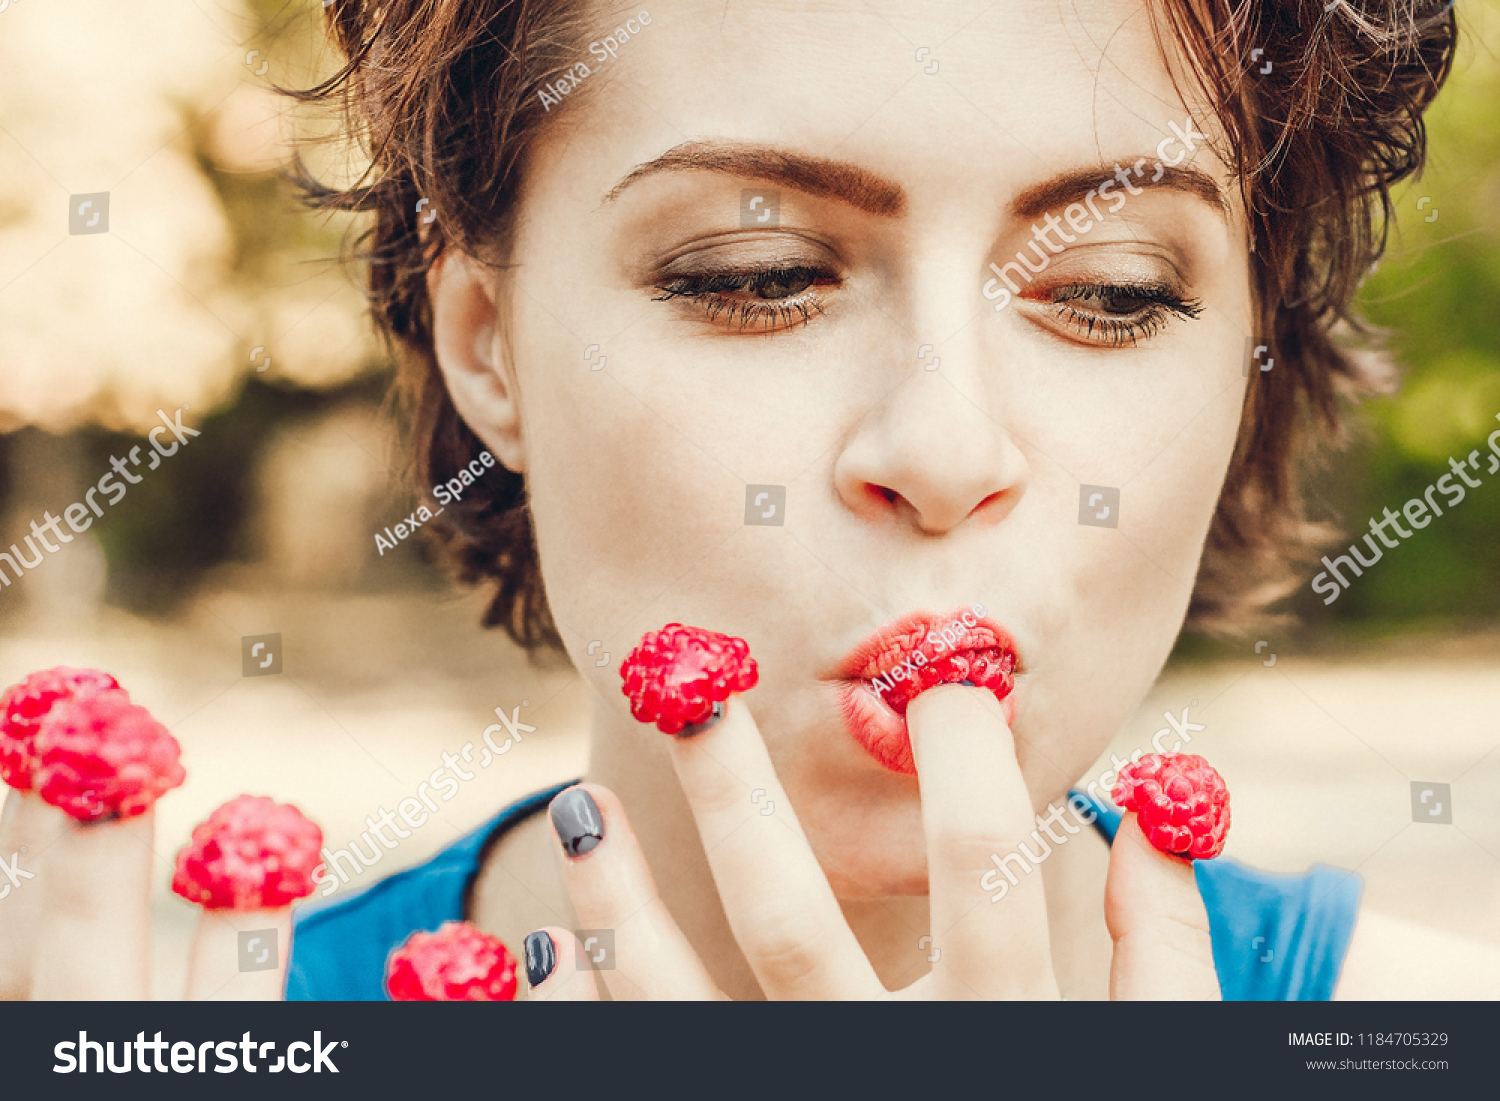 Women erotically licking their fingers